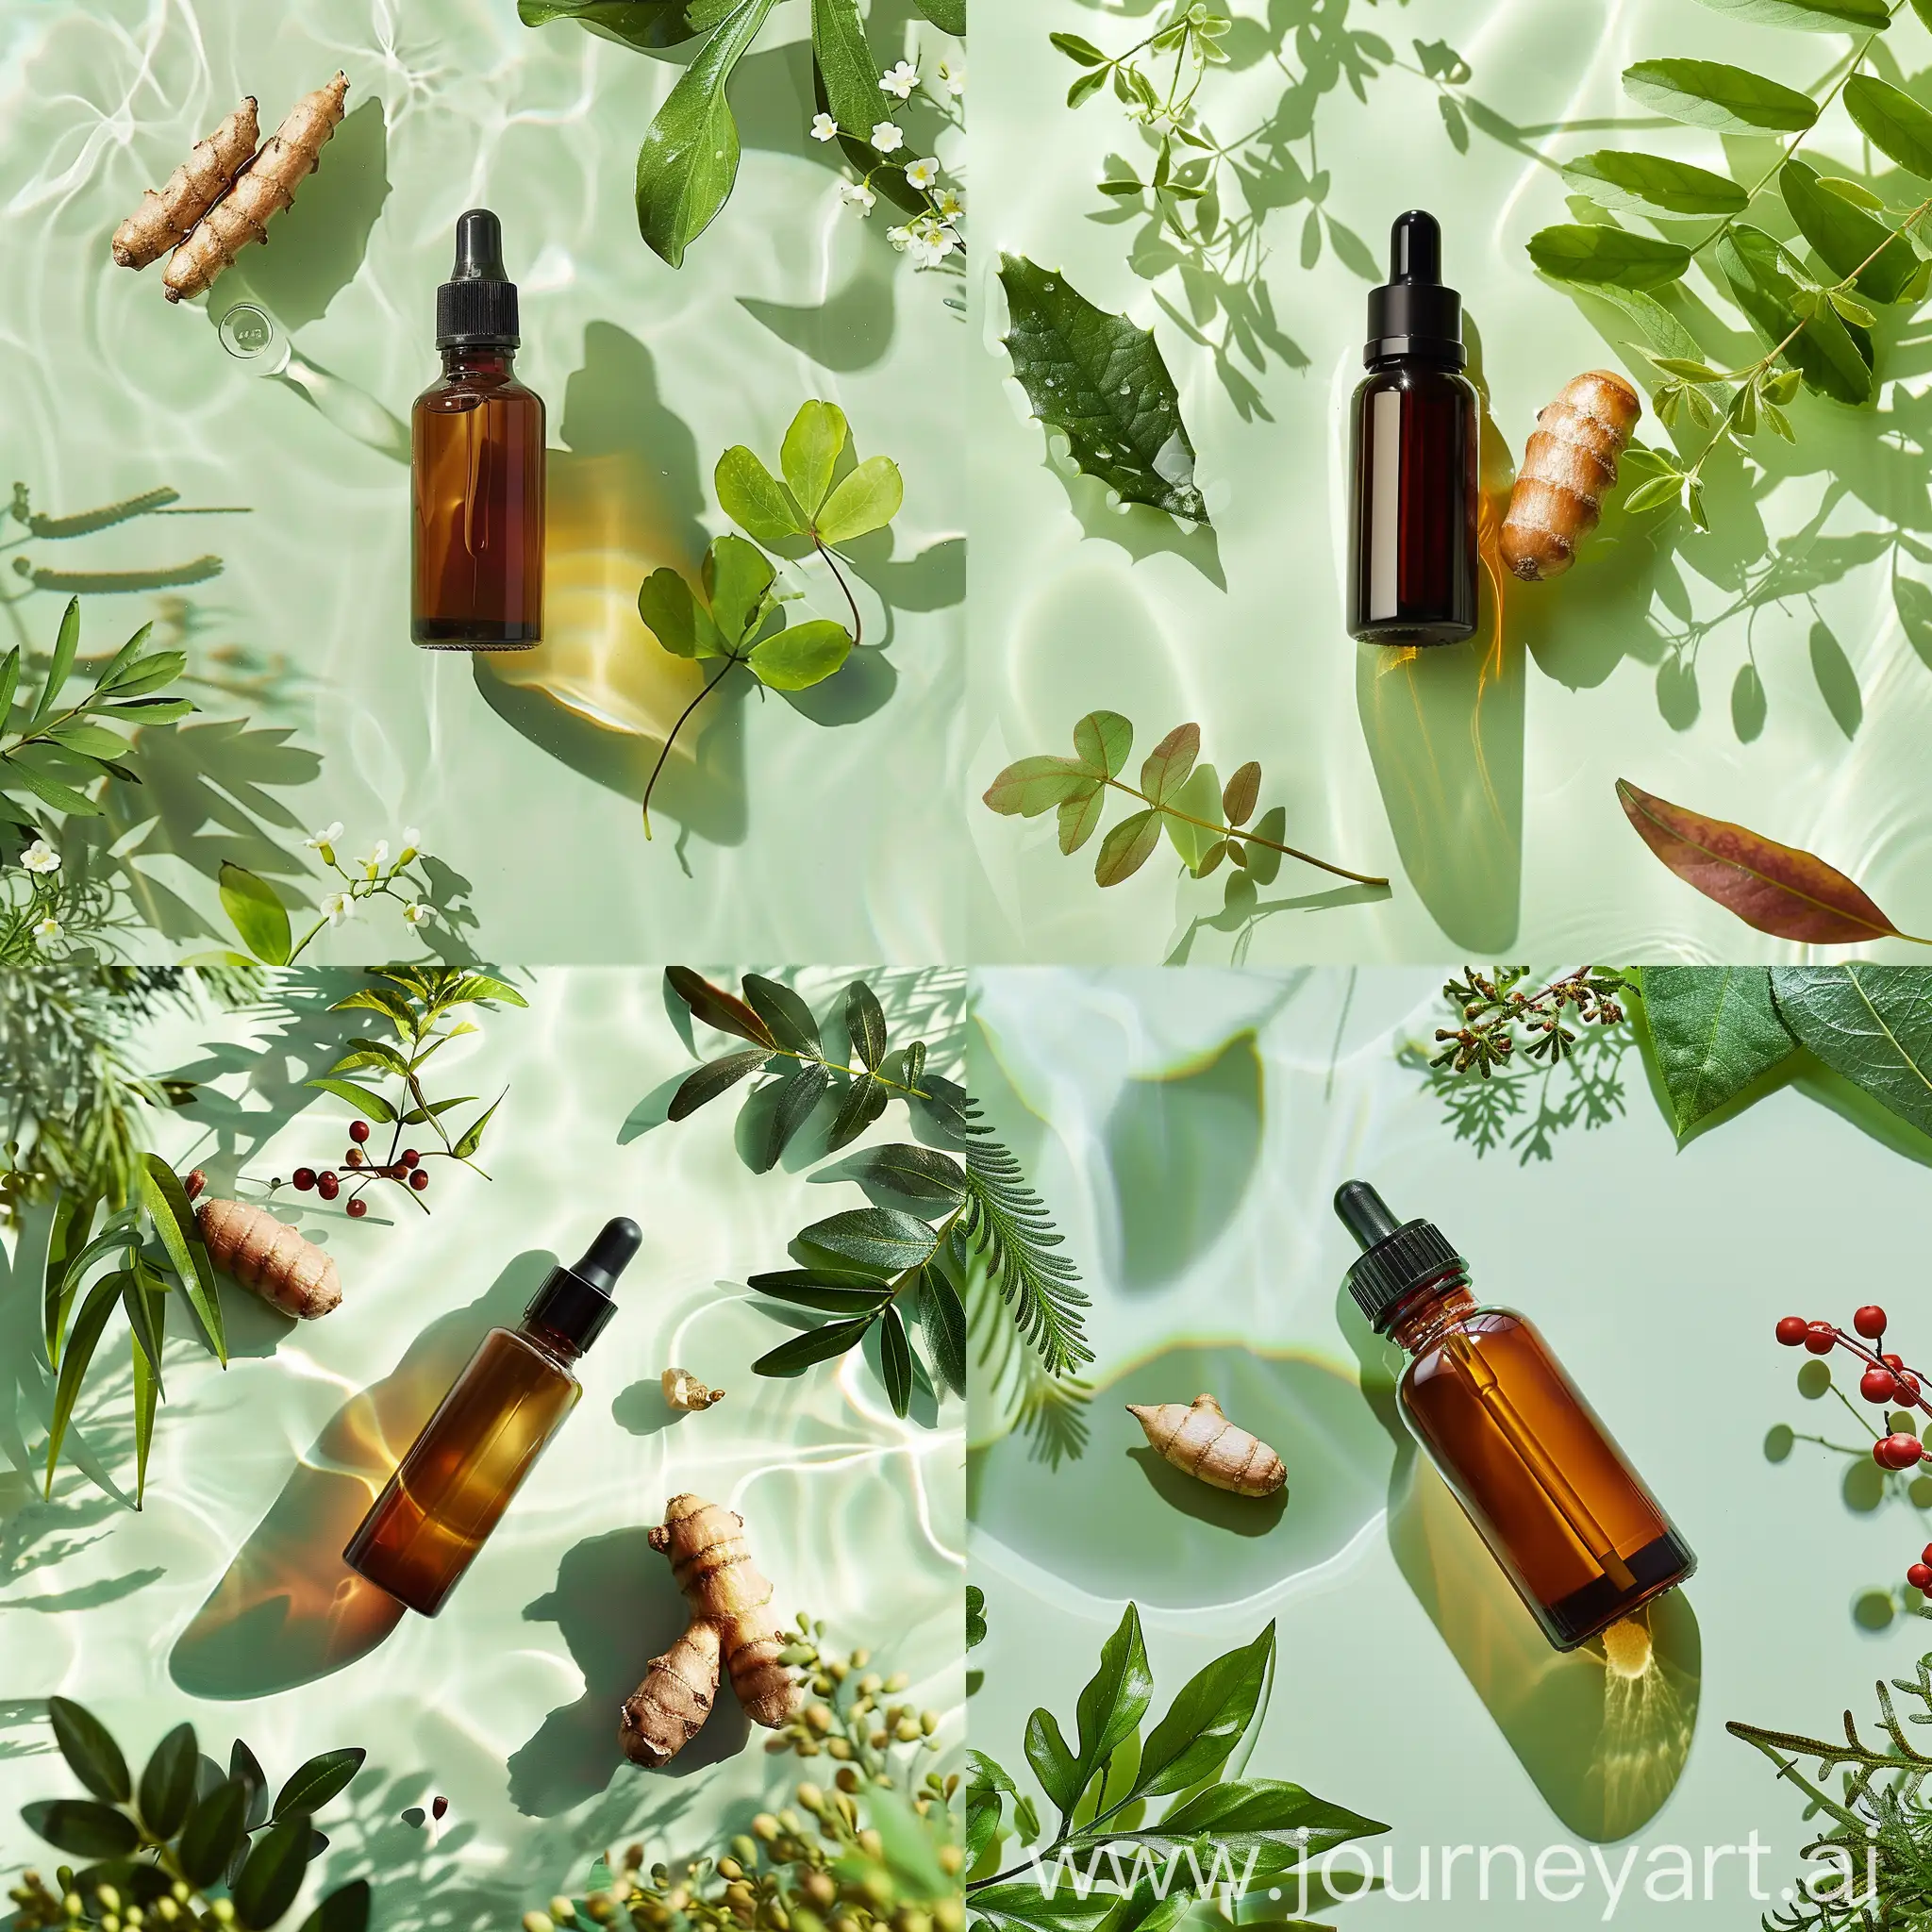 Product: Brown glass cosmetic bottle
Background: cosmetic bottle lying on light green water
Factors:

Soft focus
Ginger, perilla leaves, multiflora, and mistletoe float on the water surface around the product
Elegant light
Reflection on the water surface
The atmosphere is quiet
Style: fresh, natural, quiet
Aspect ratio: 16:9